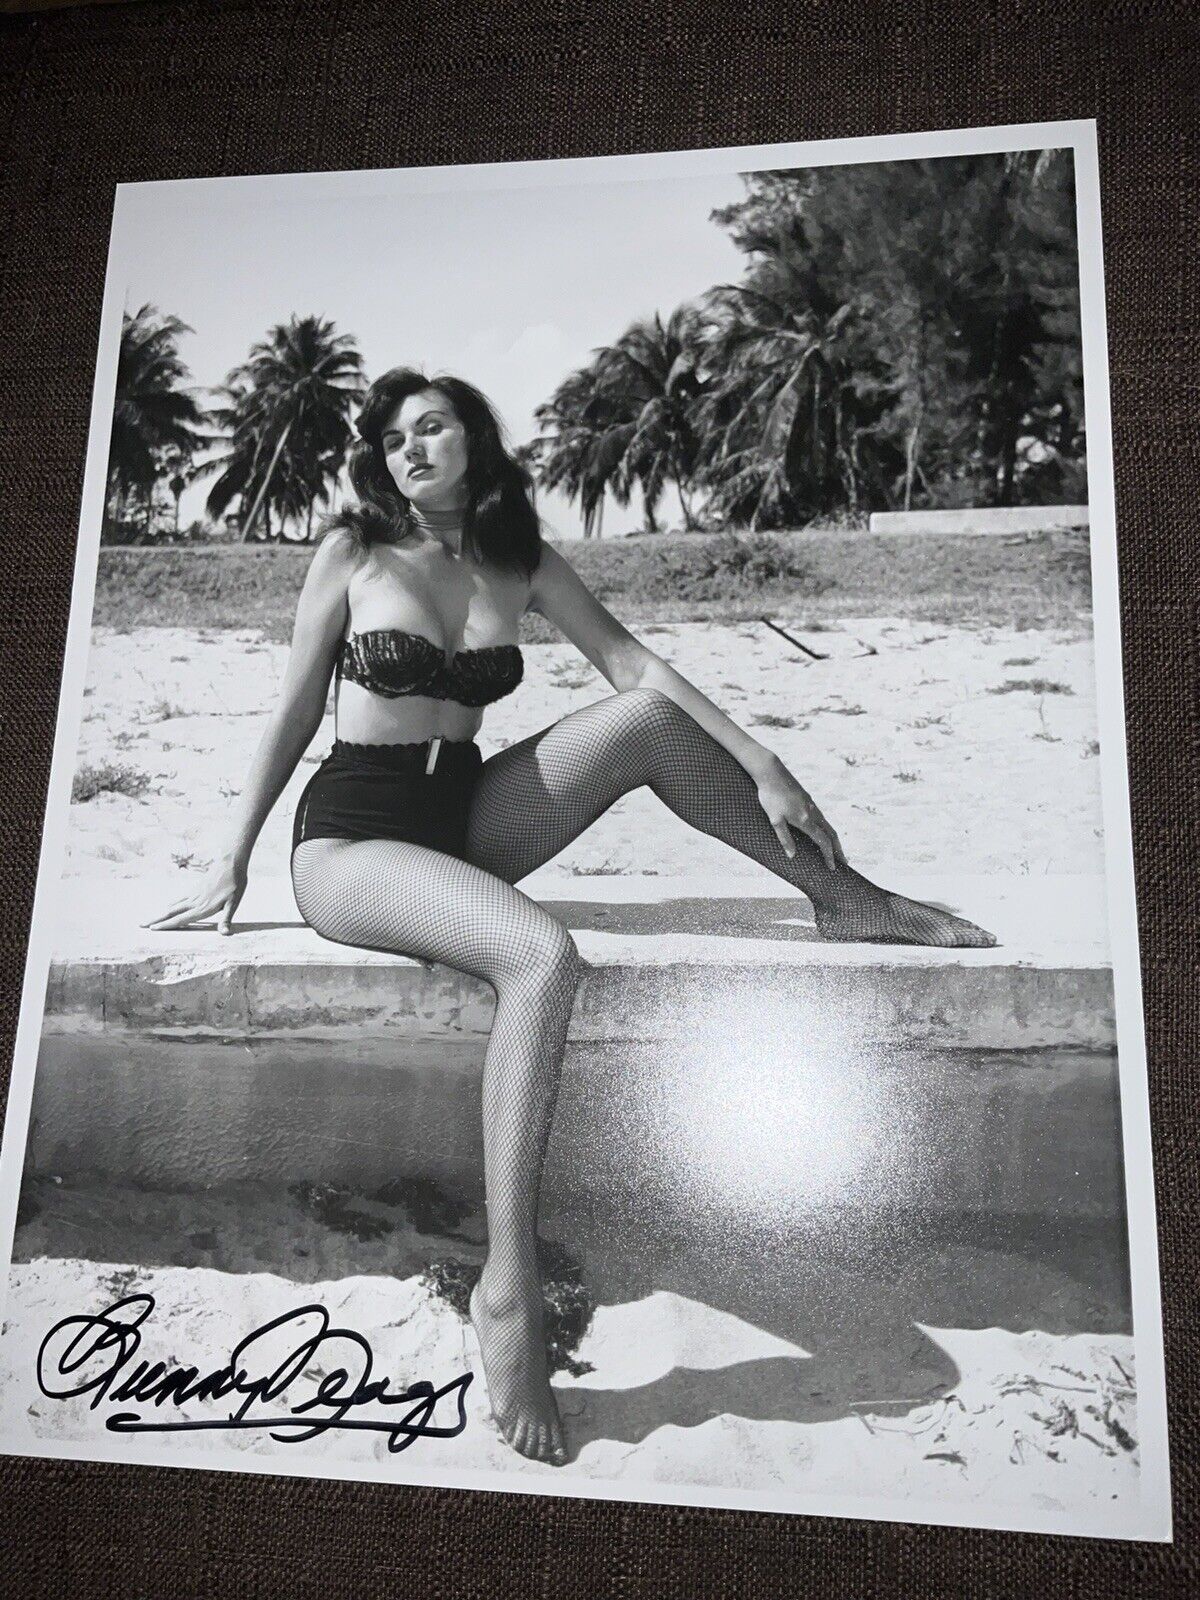 Erotic Black And White Photo Of Bunny Yeager By Bunny Yeager Signed By Yeager